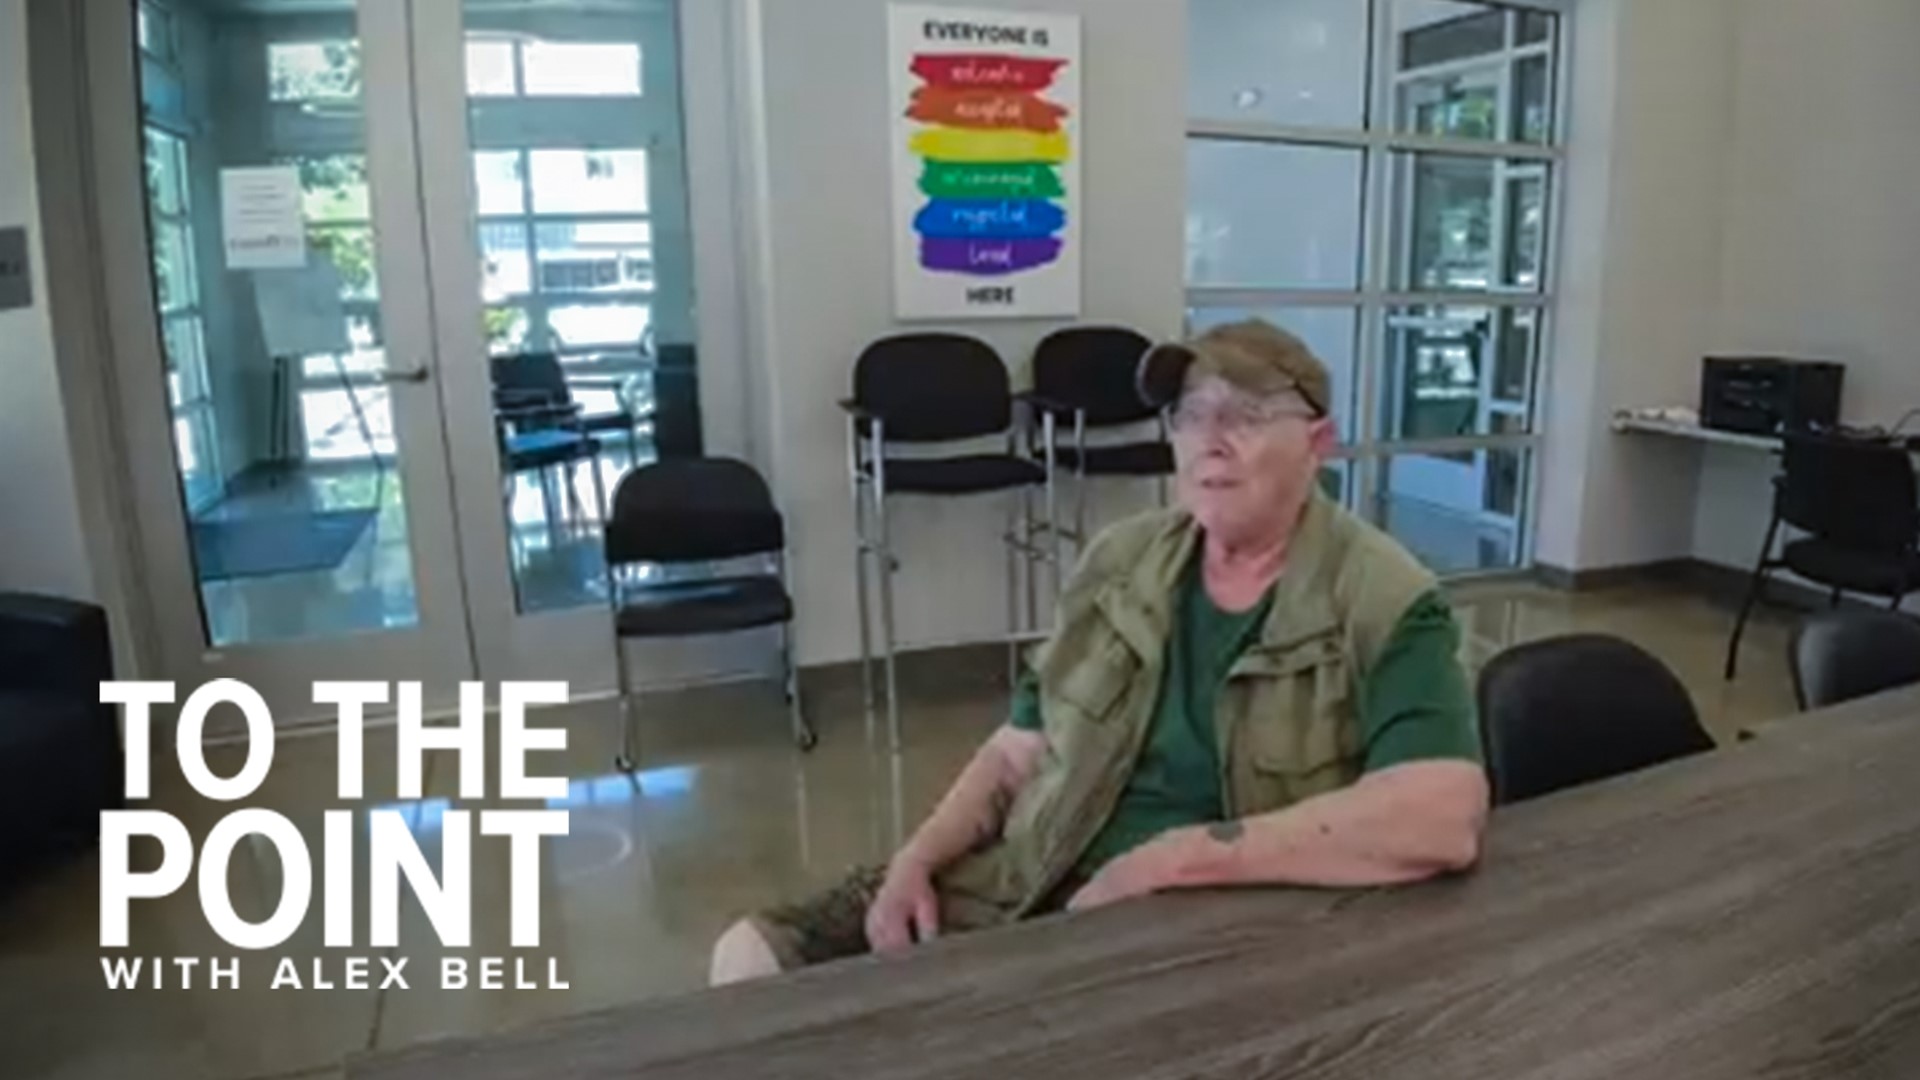 On today's edition of To The Point, we examine Lavender Courtyard, a Sacramento LGBTQ+ senior housing center.